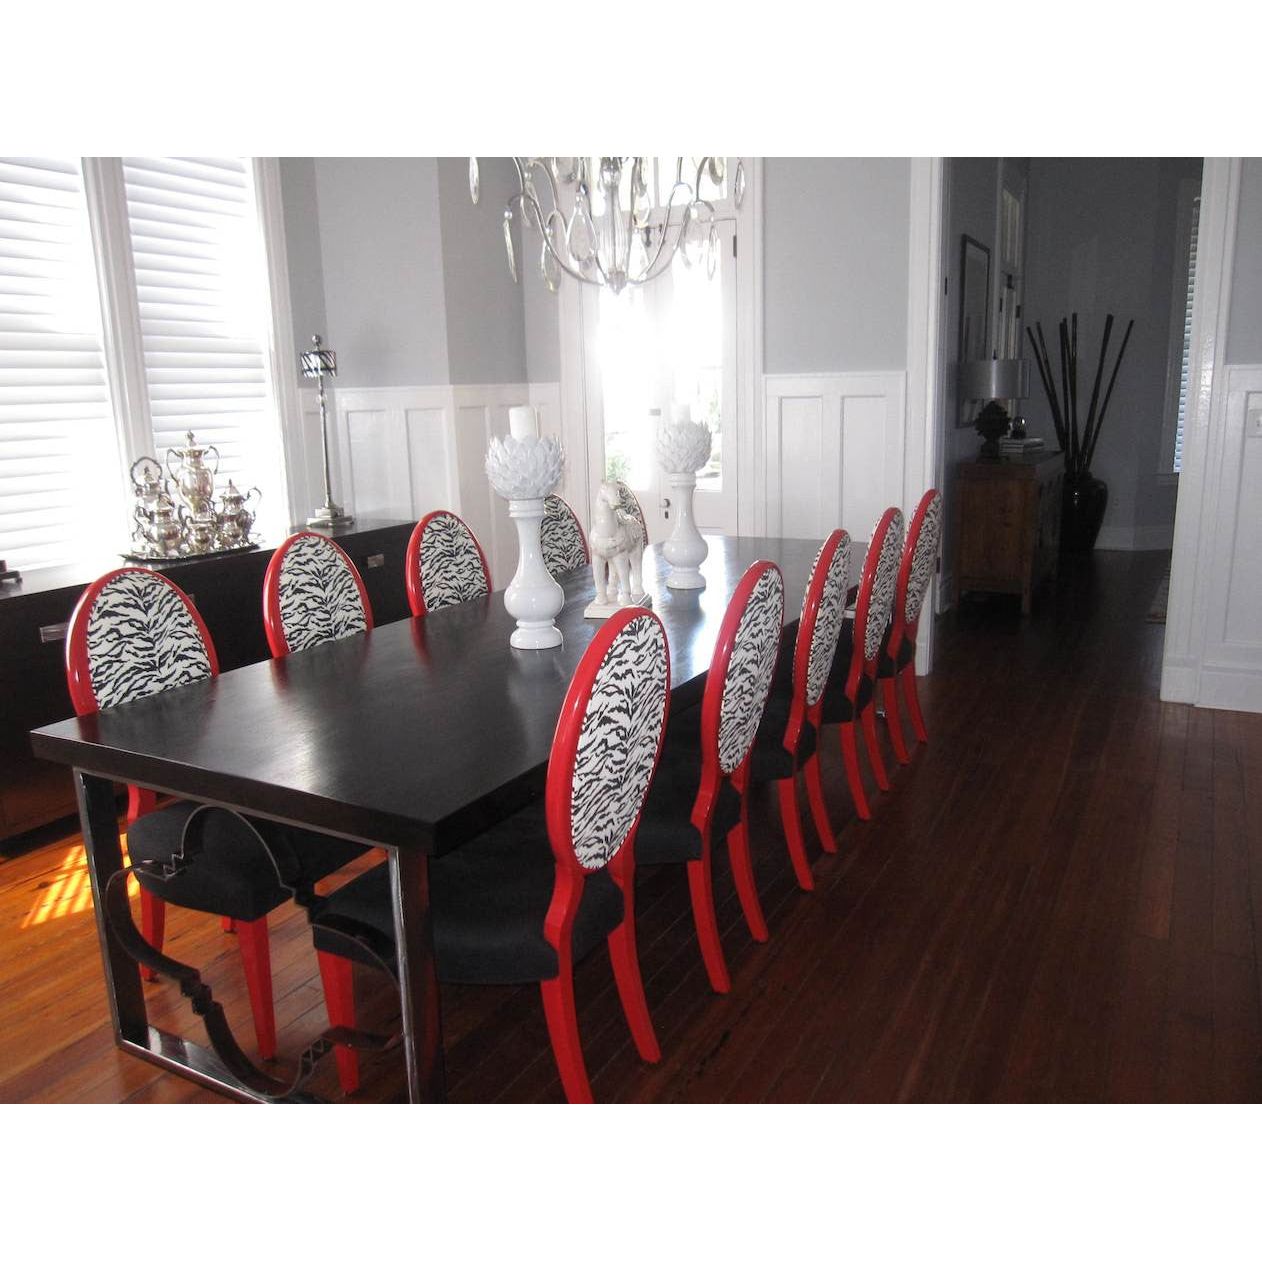 Custom: Dining Table, Buffet, Chairs. Showroom: Tabletop Accessories, Buffet Lamps